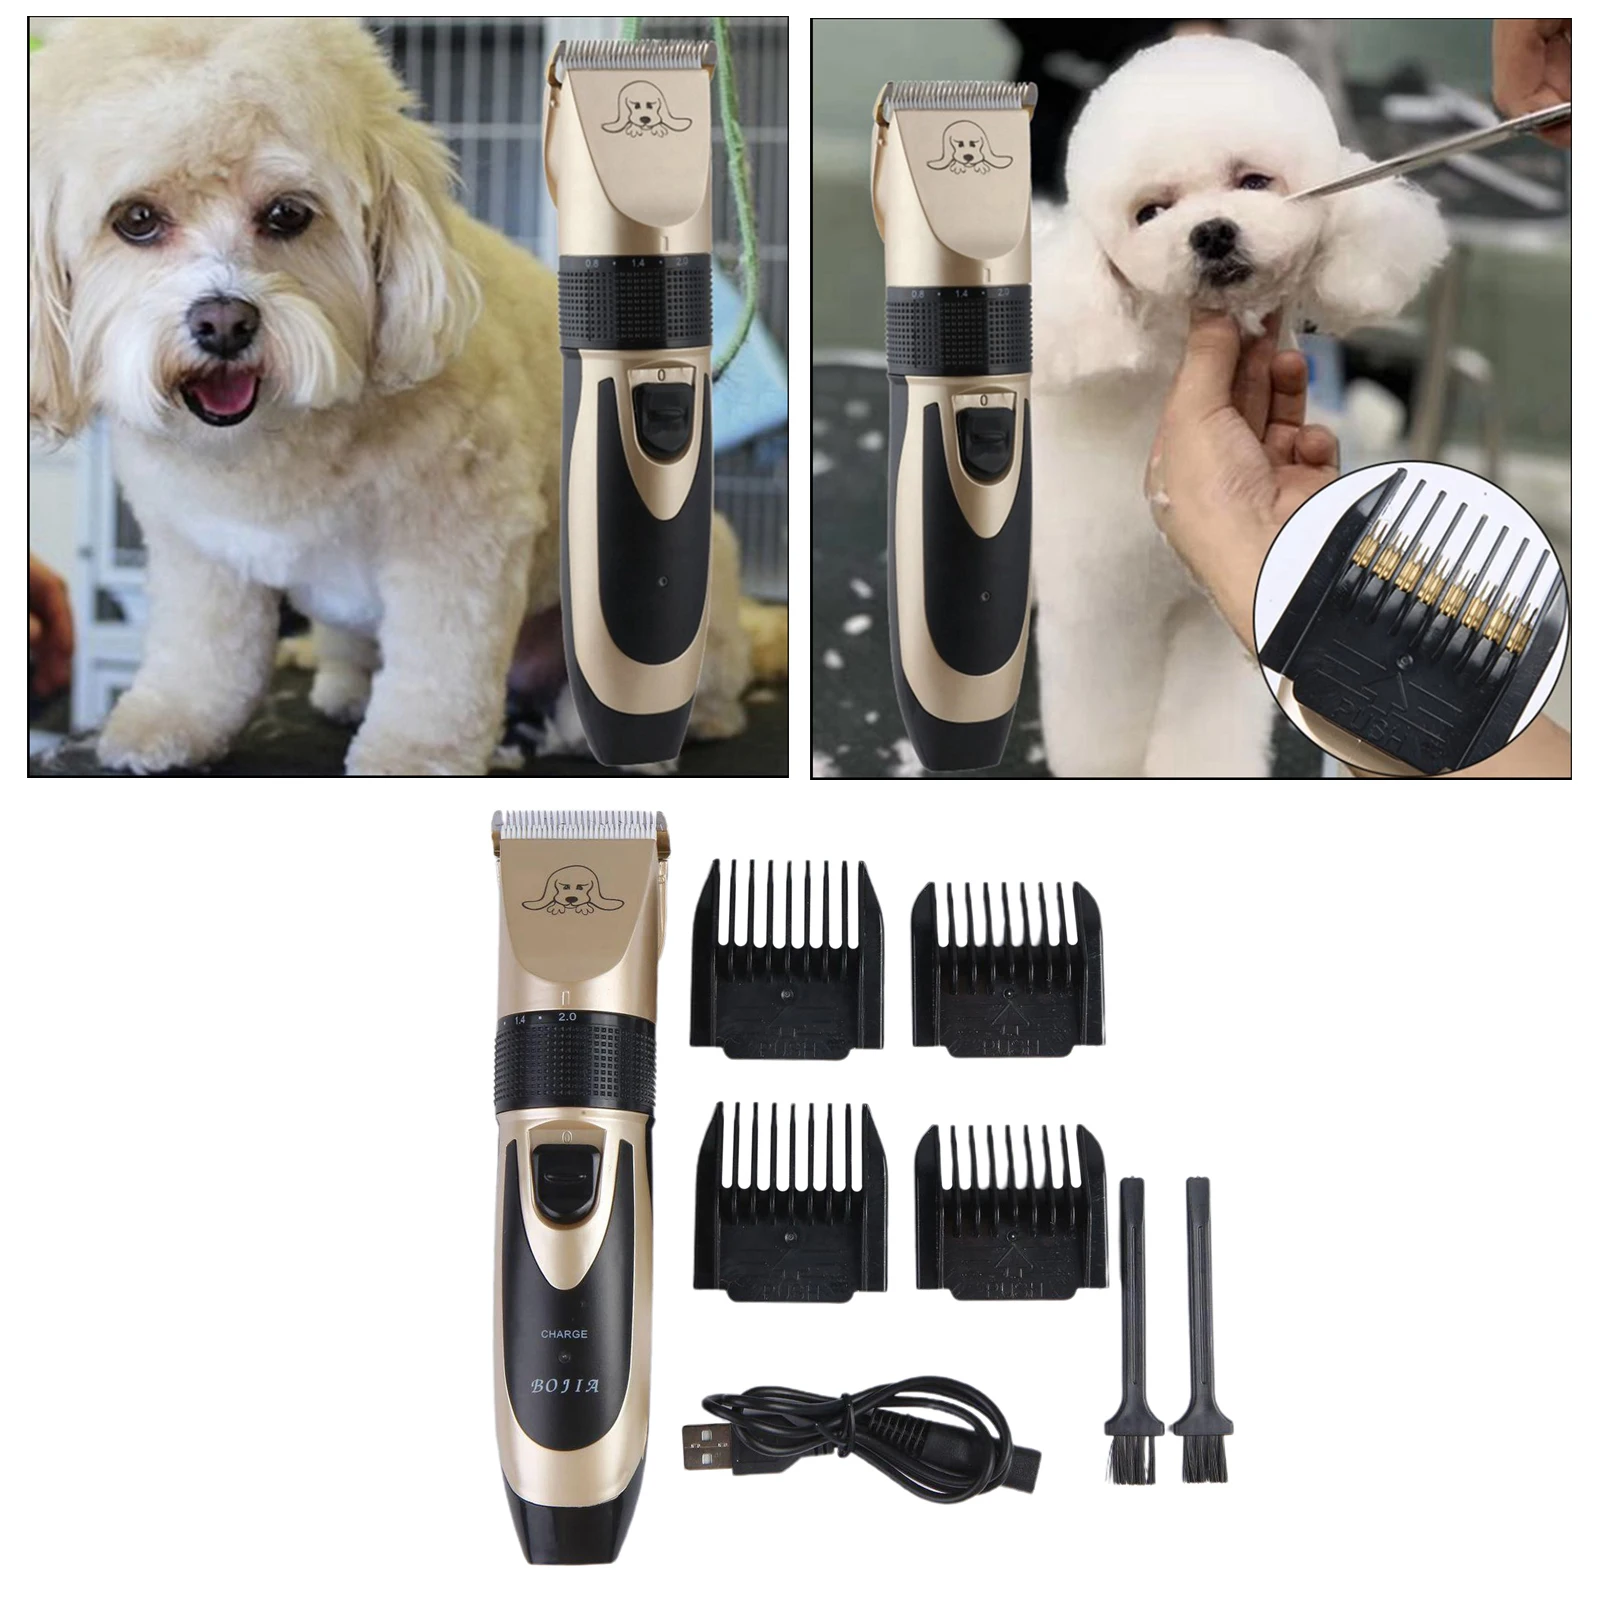 Pet Hair Thick Coats Clippers Trimmers Set for Dogs, Cats,Other Pets Animals